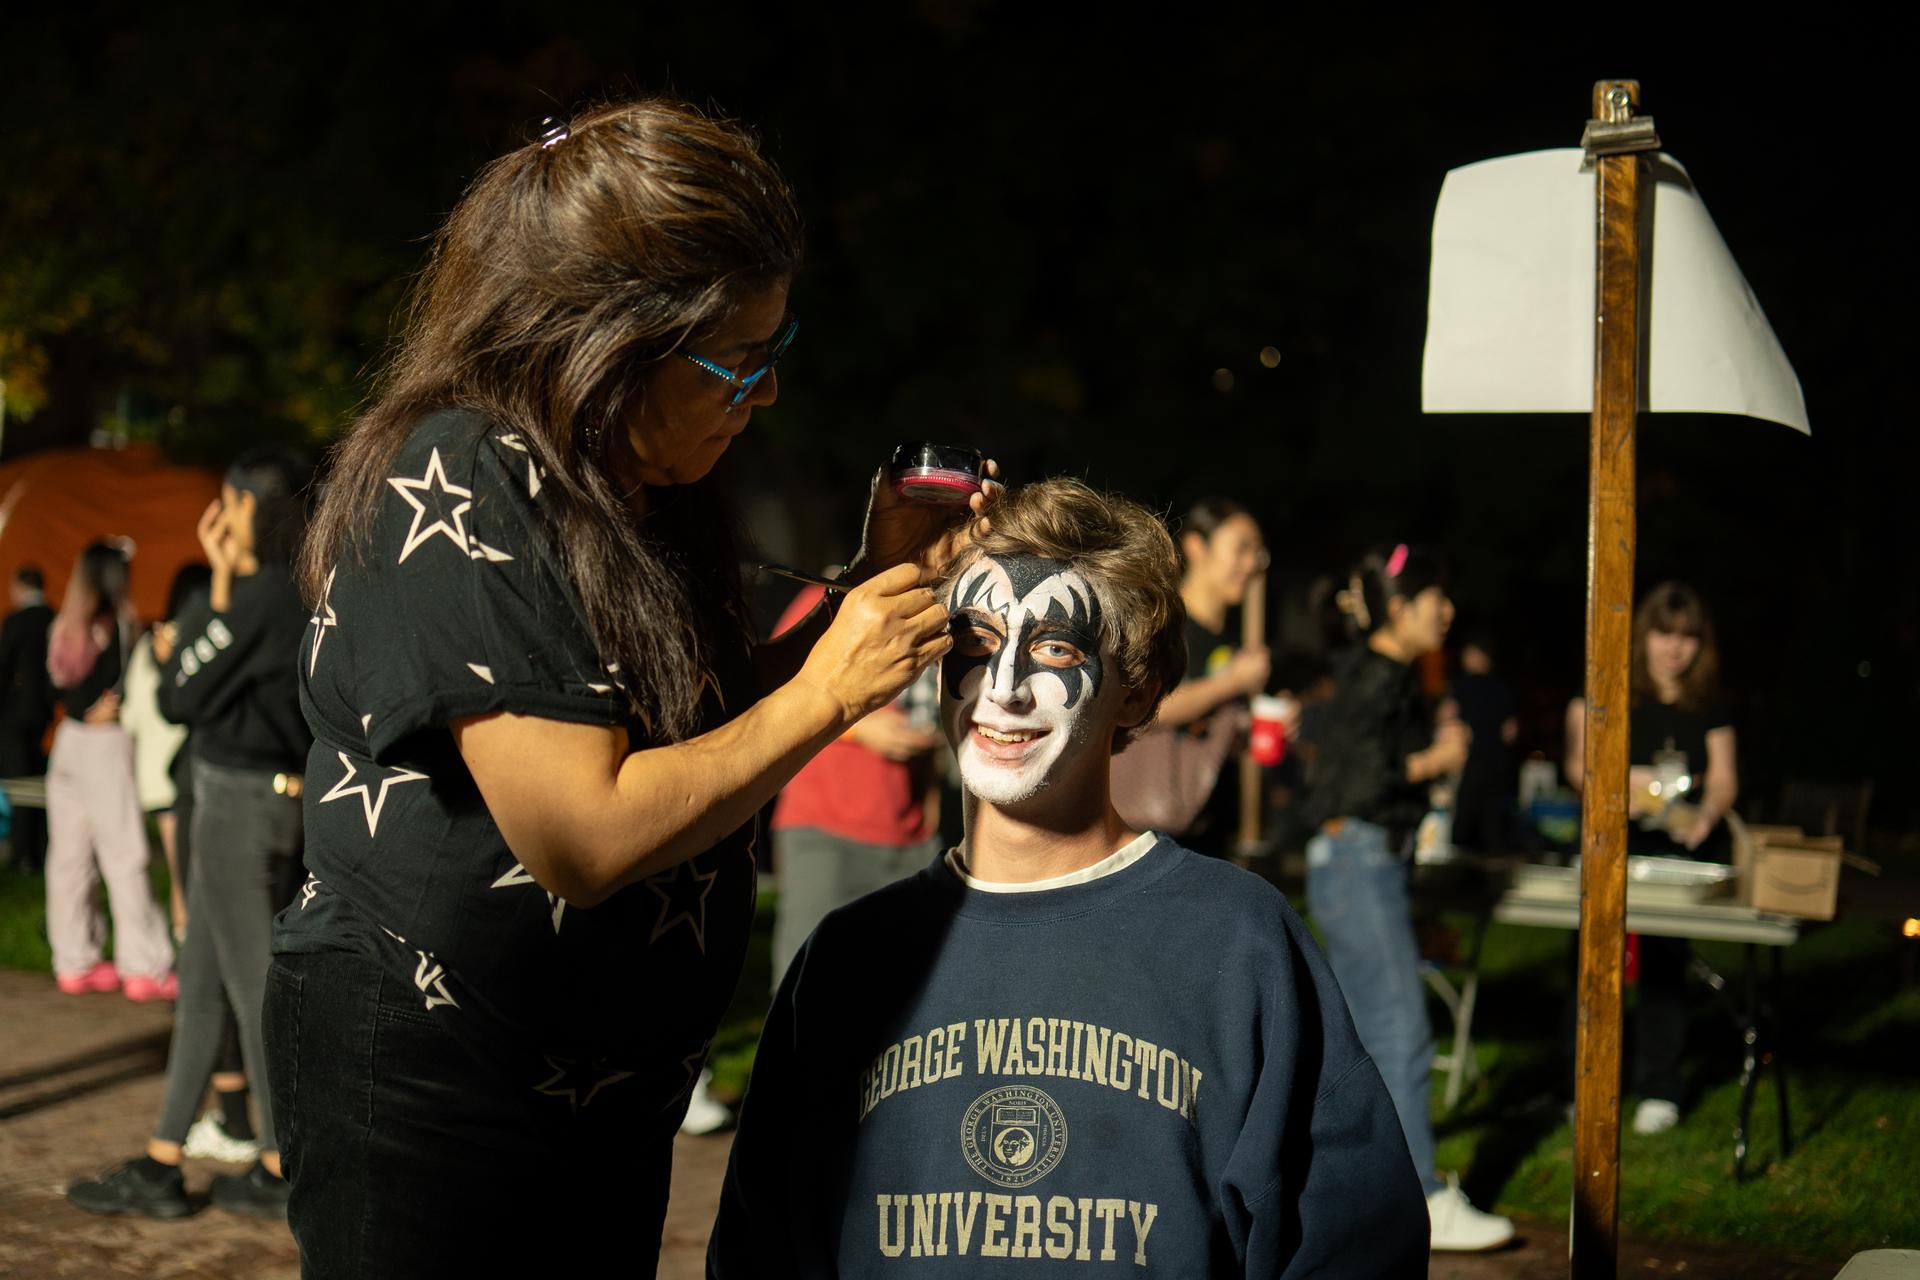 GW student gets their face painted